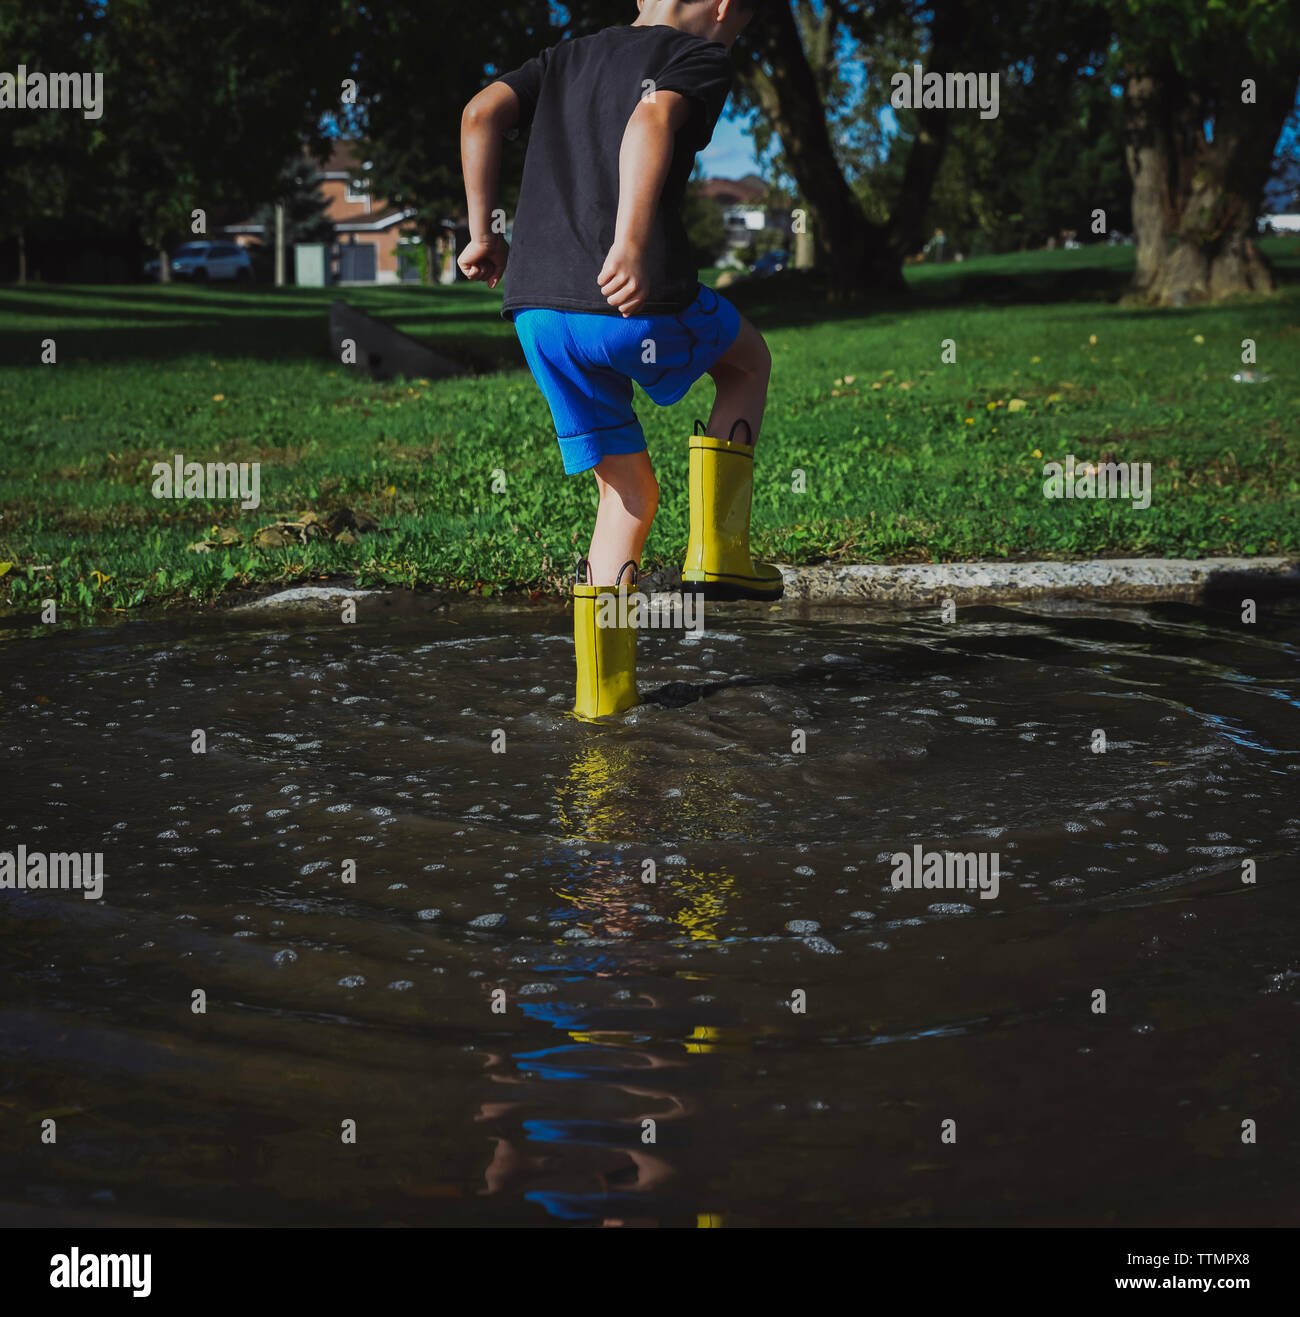 Rear view of playful boy stamping Foot while standing in puddle at park Stock Photo